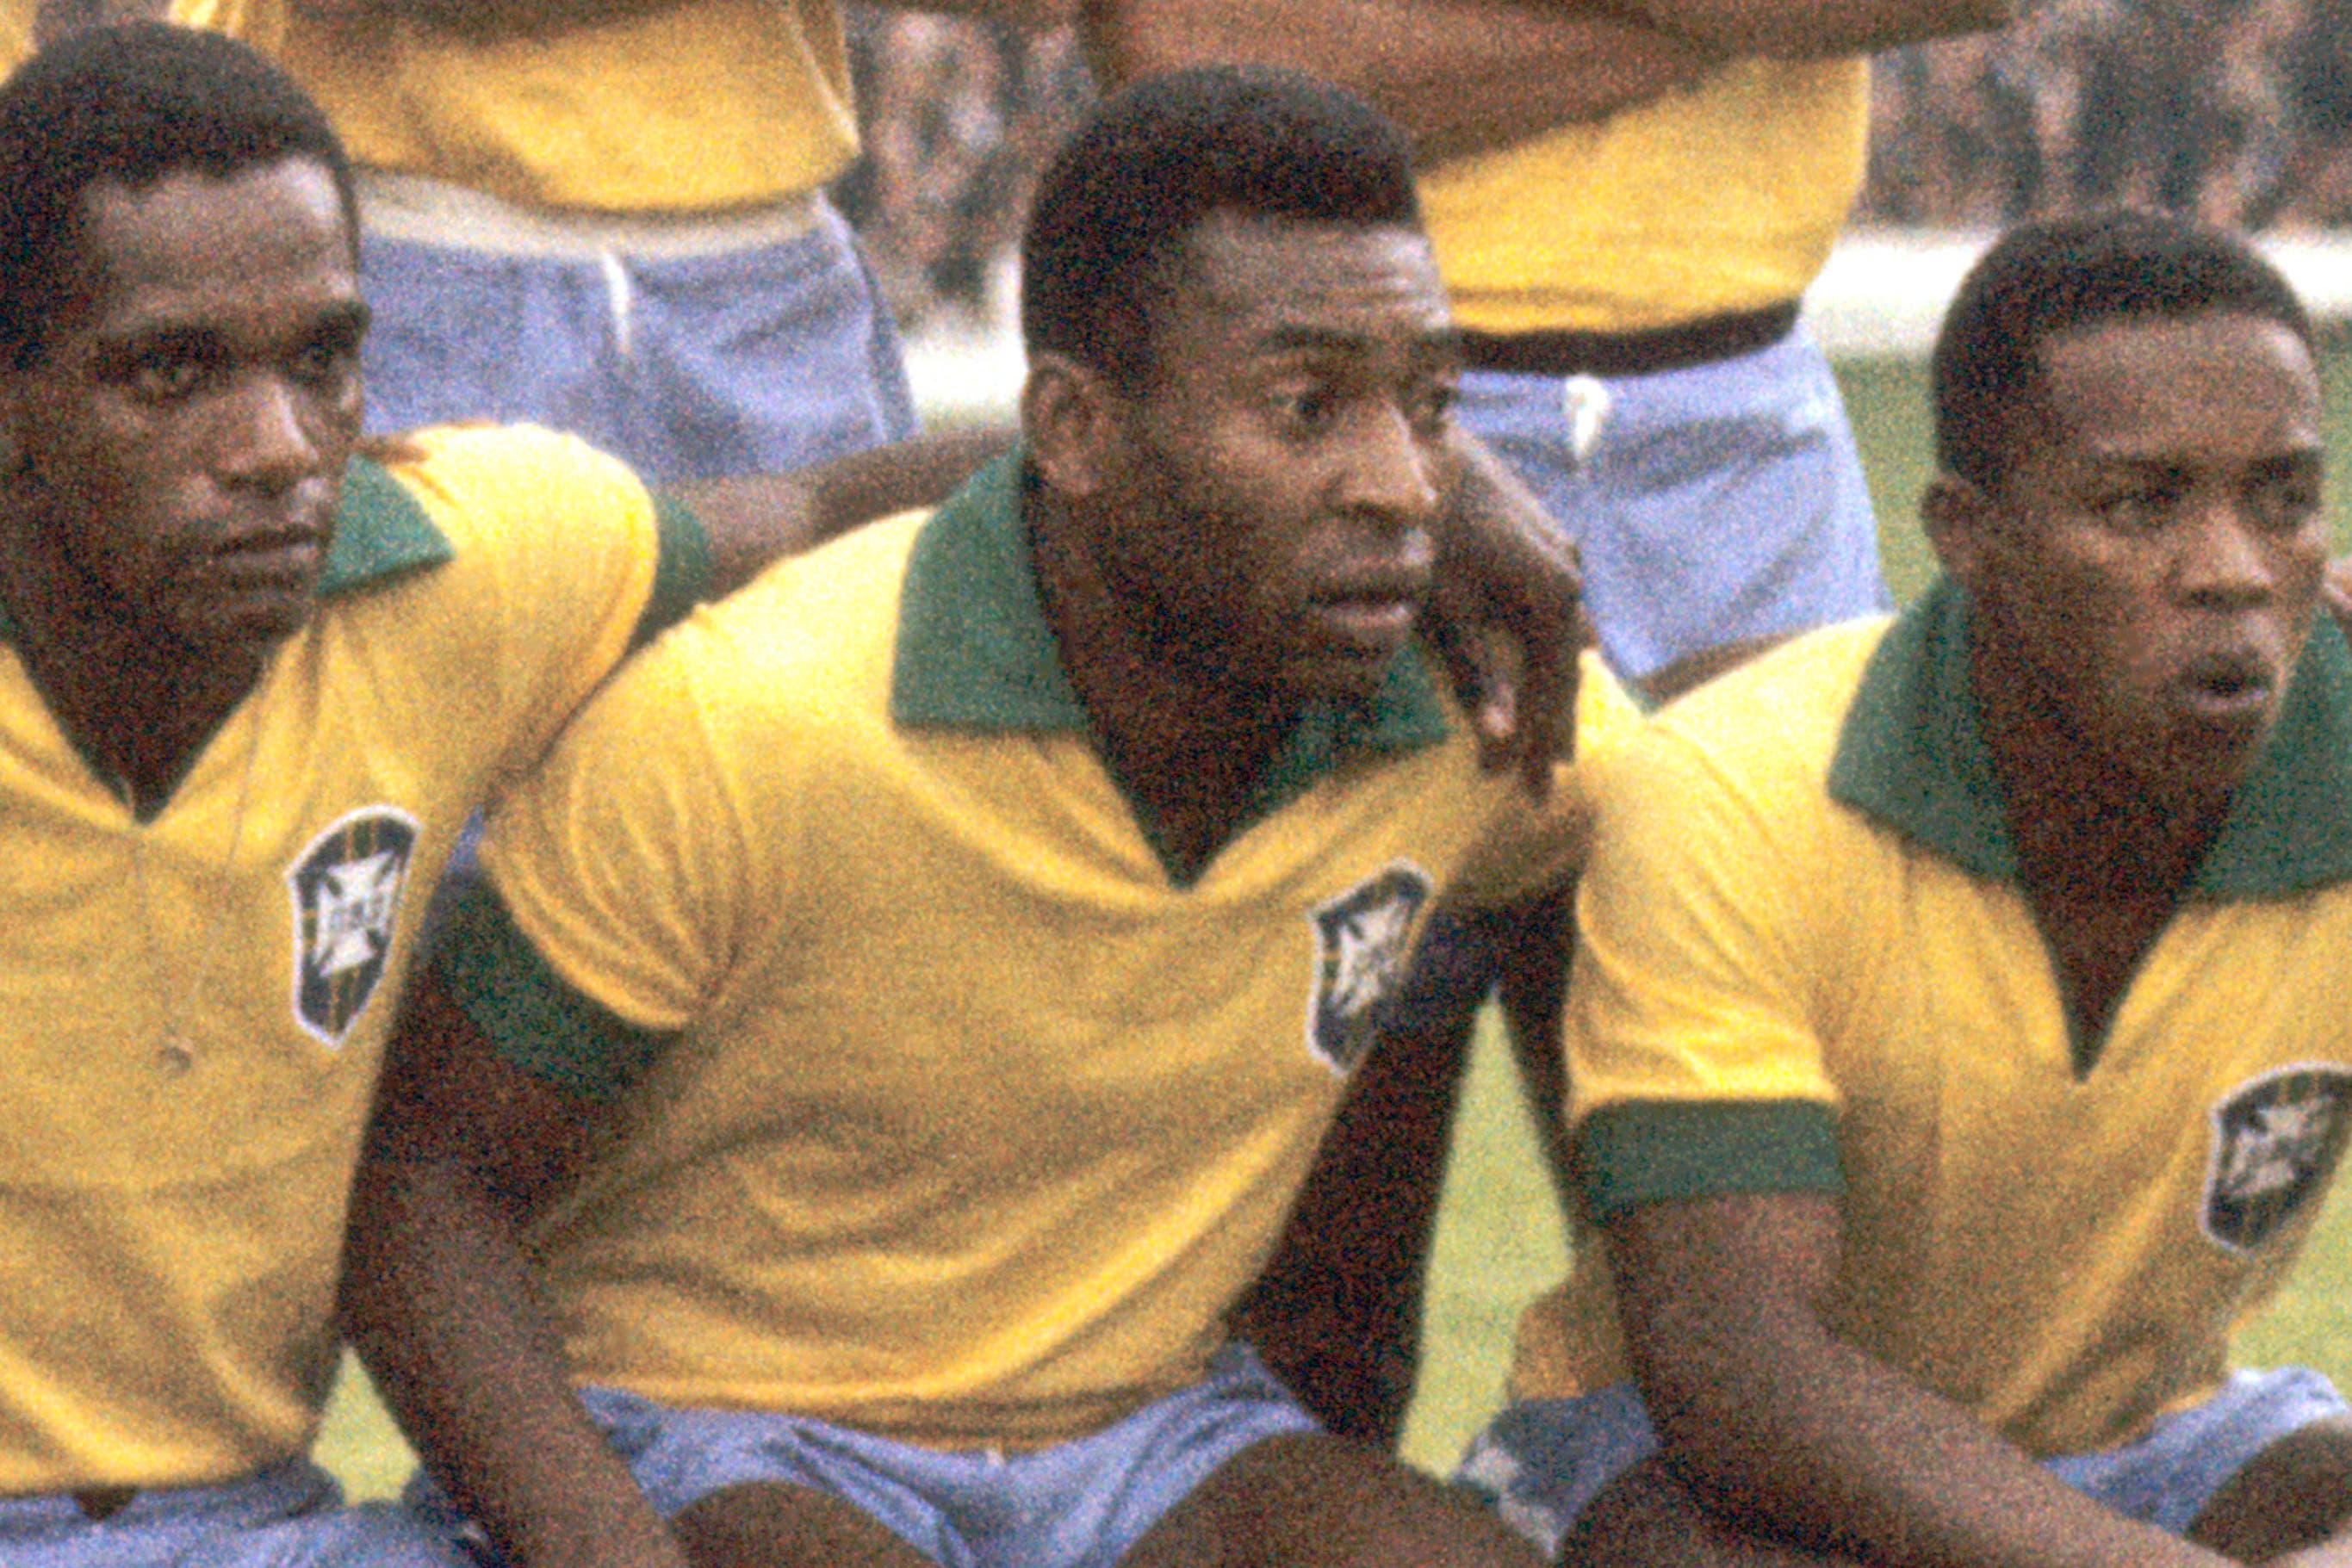 Pele had a legendary career and won three World Cups with Brazil